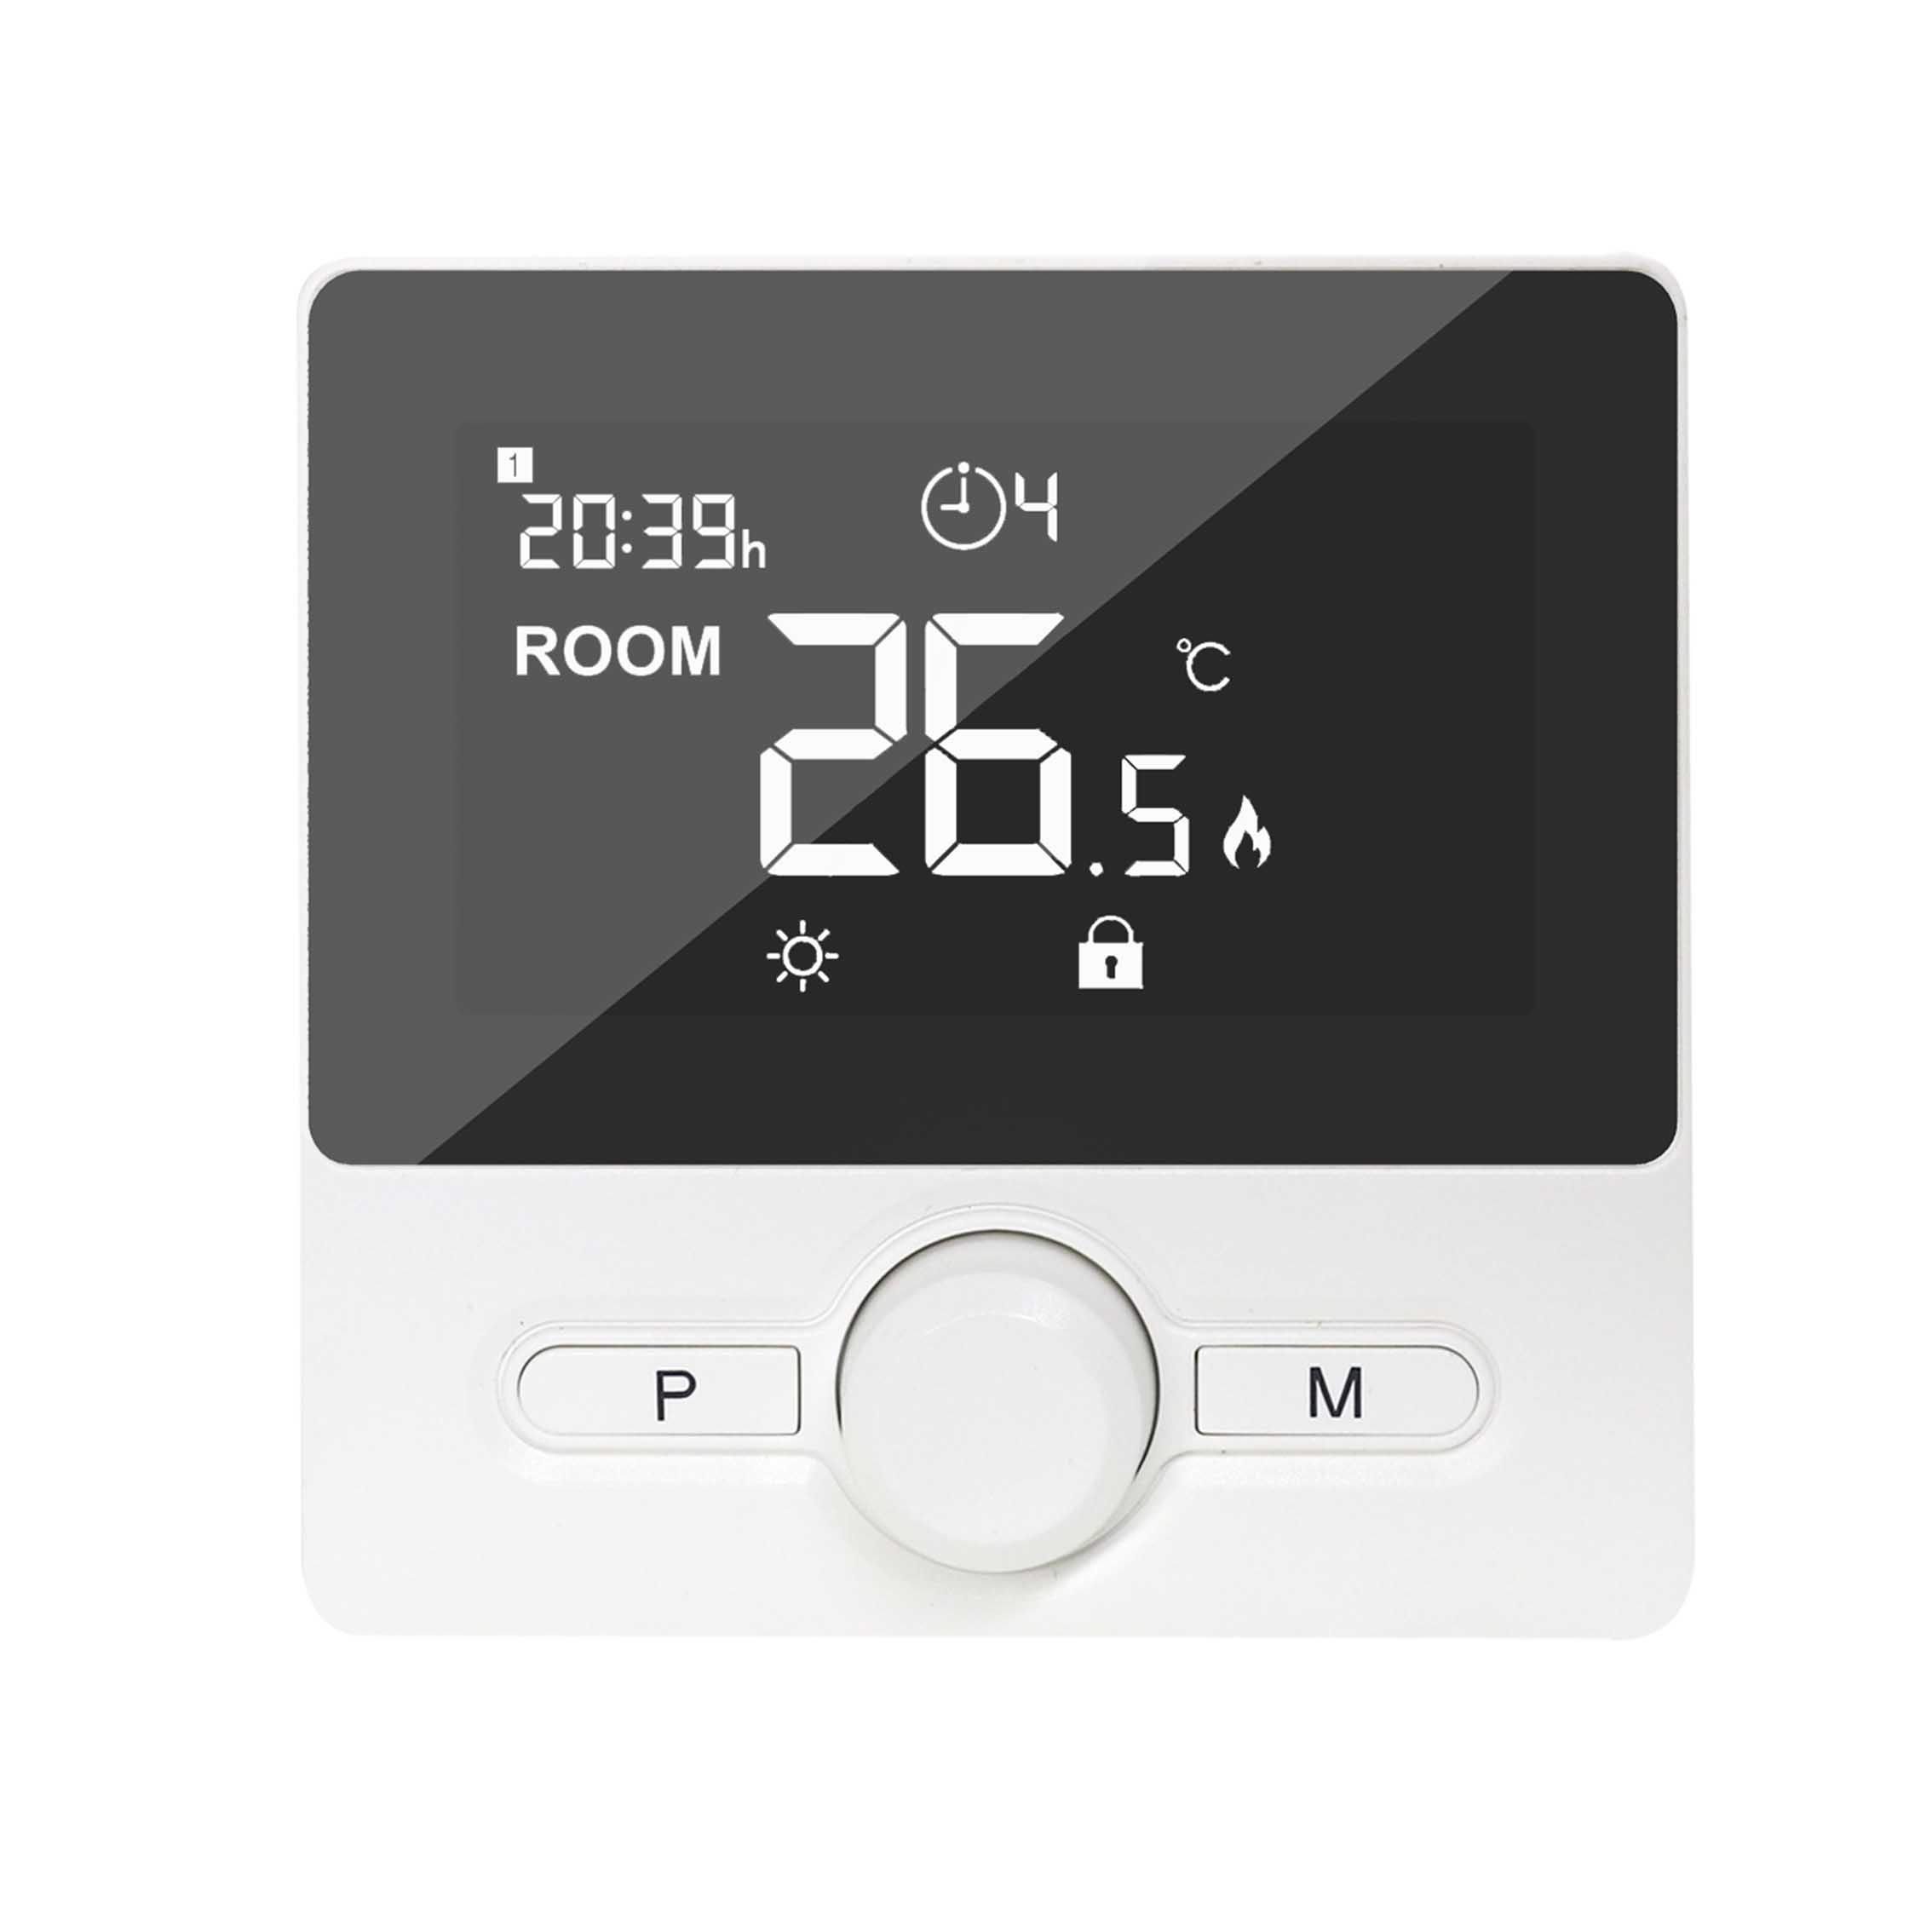 Latest WiFi Thermostat Boiler Control Room Thermostat Wired Option